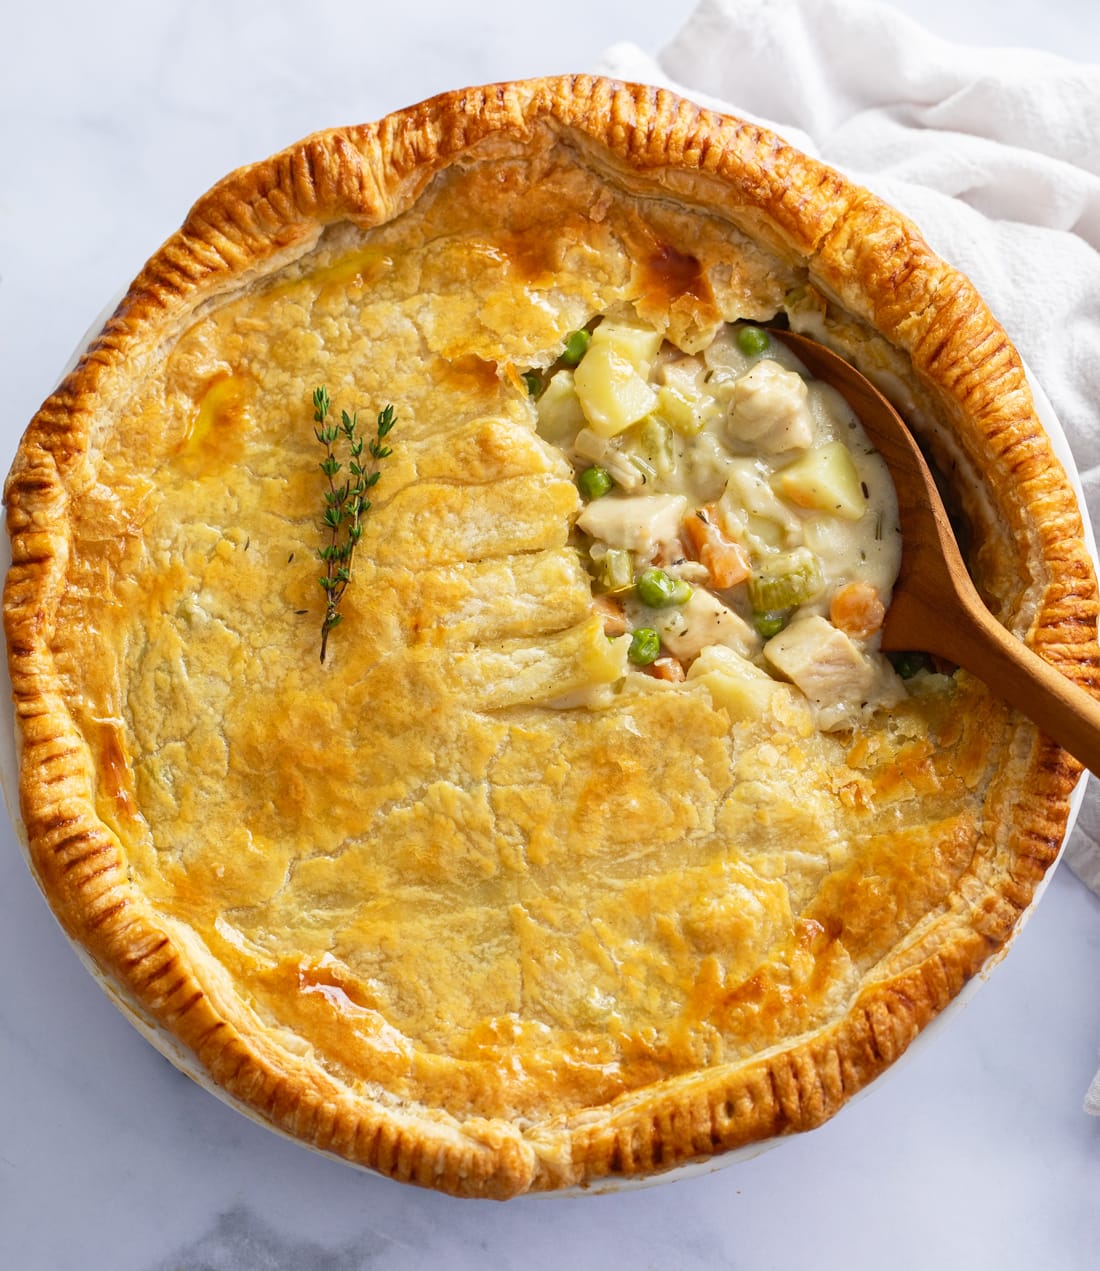 Overhead view of Chicken Pot Pie in a pie pan with a wooden spoon scooping it up.